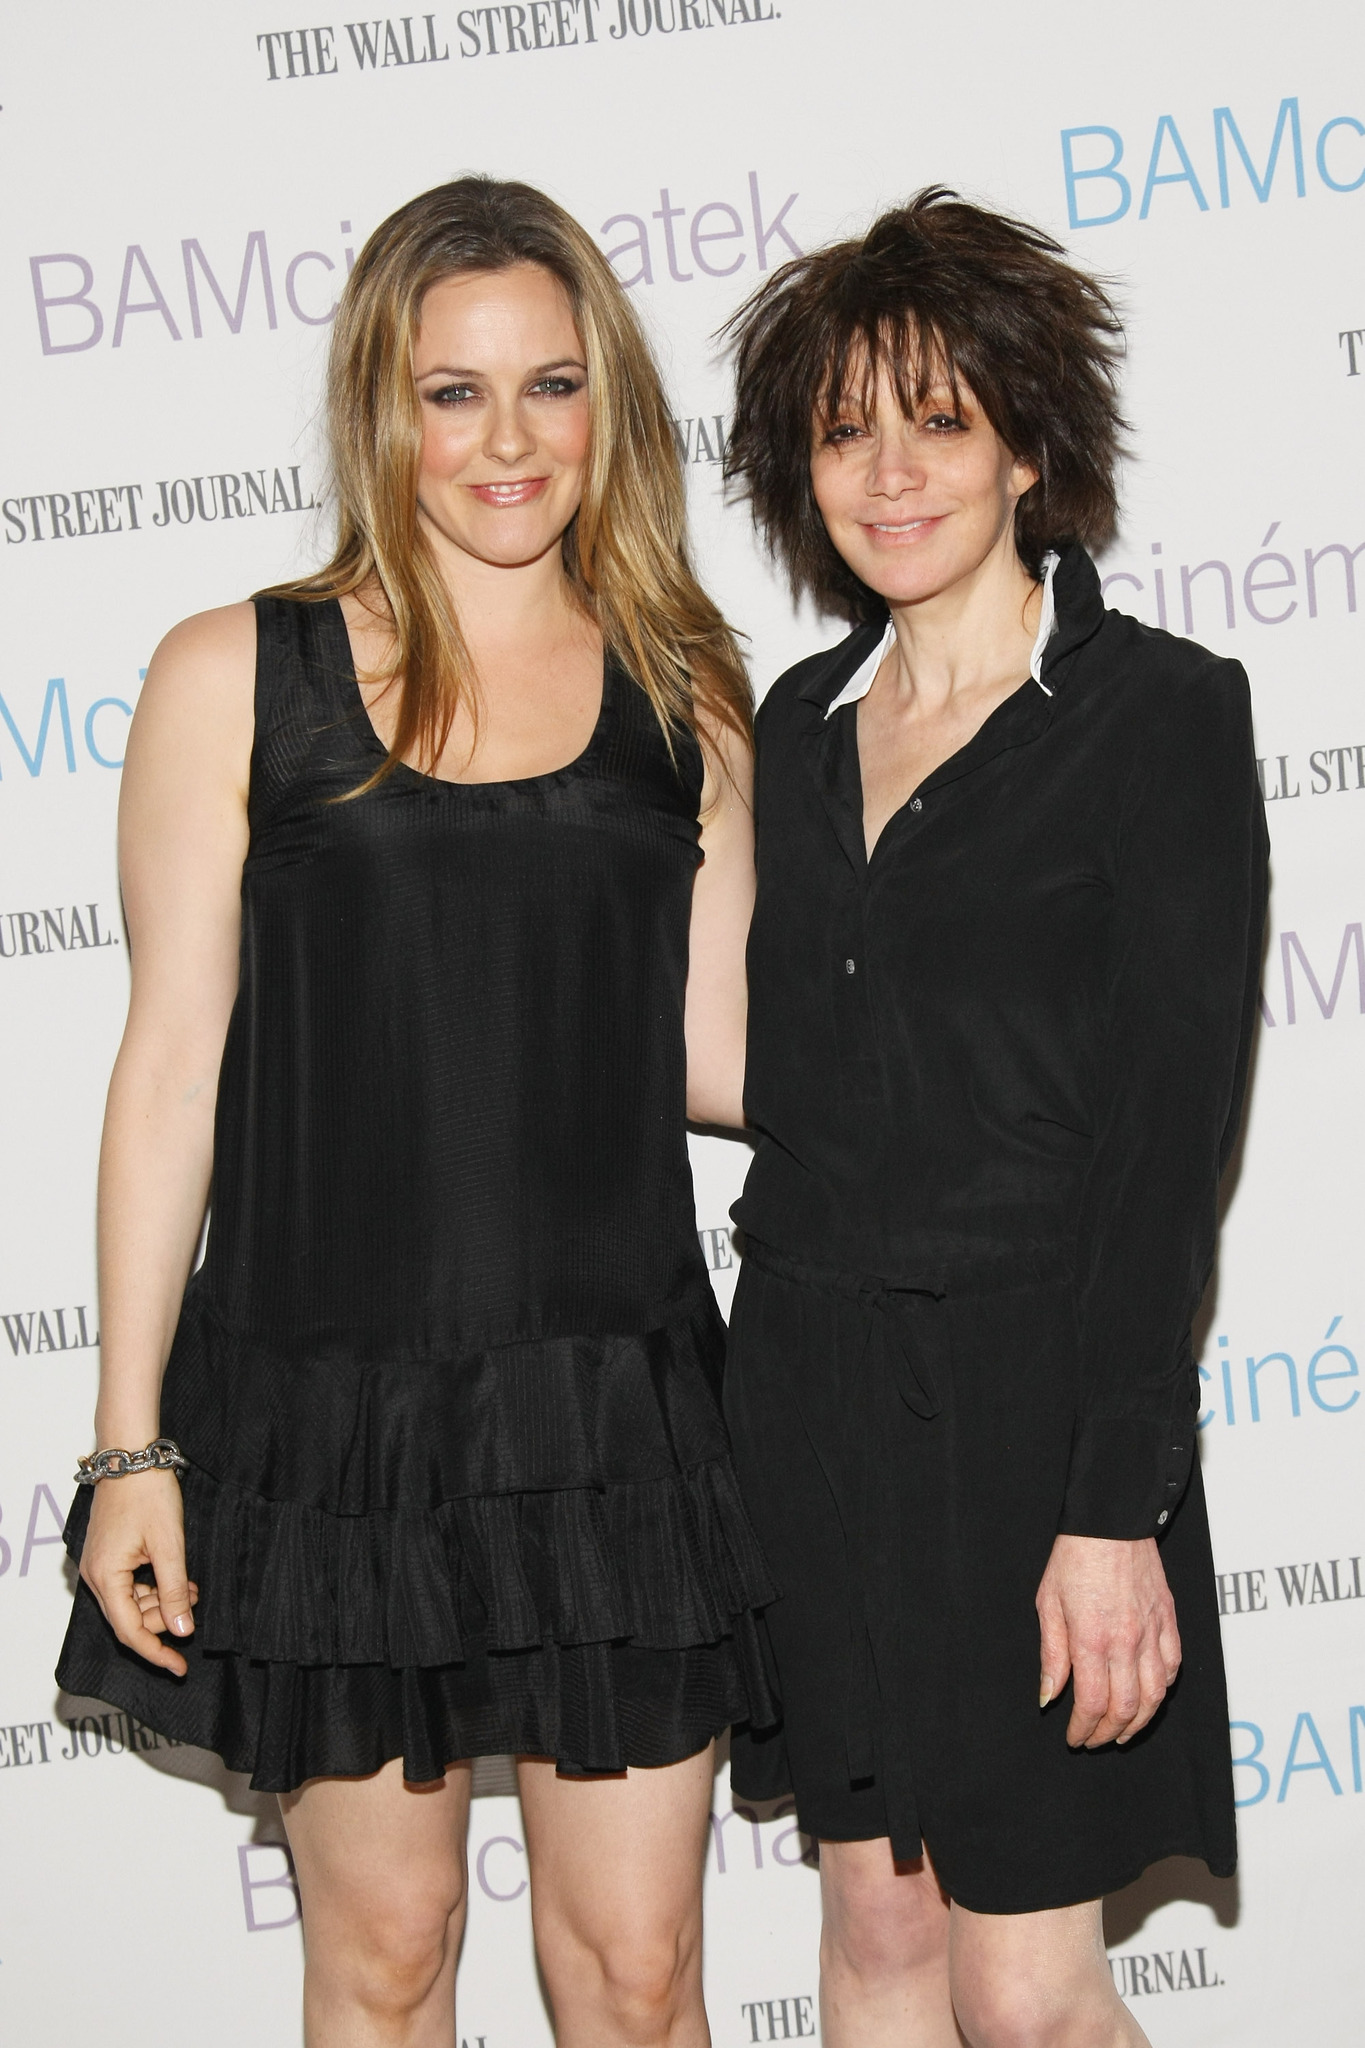 Alicia Silverstone and Amy Heckerling